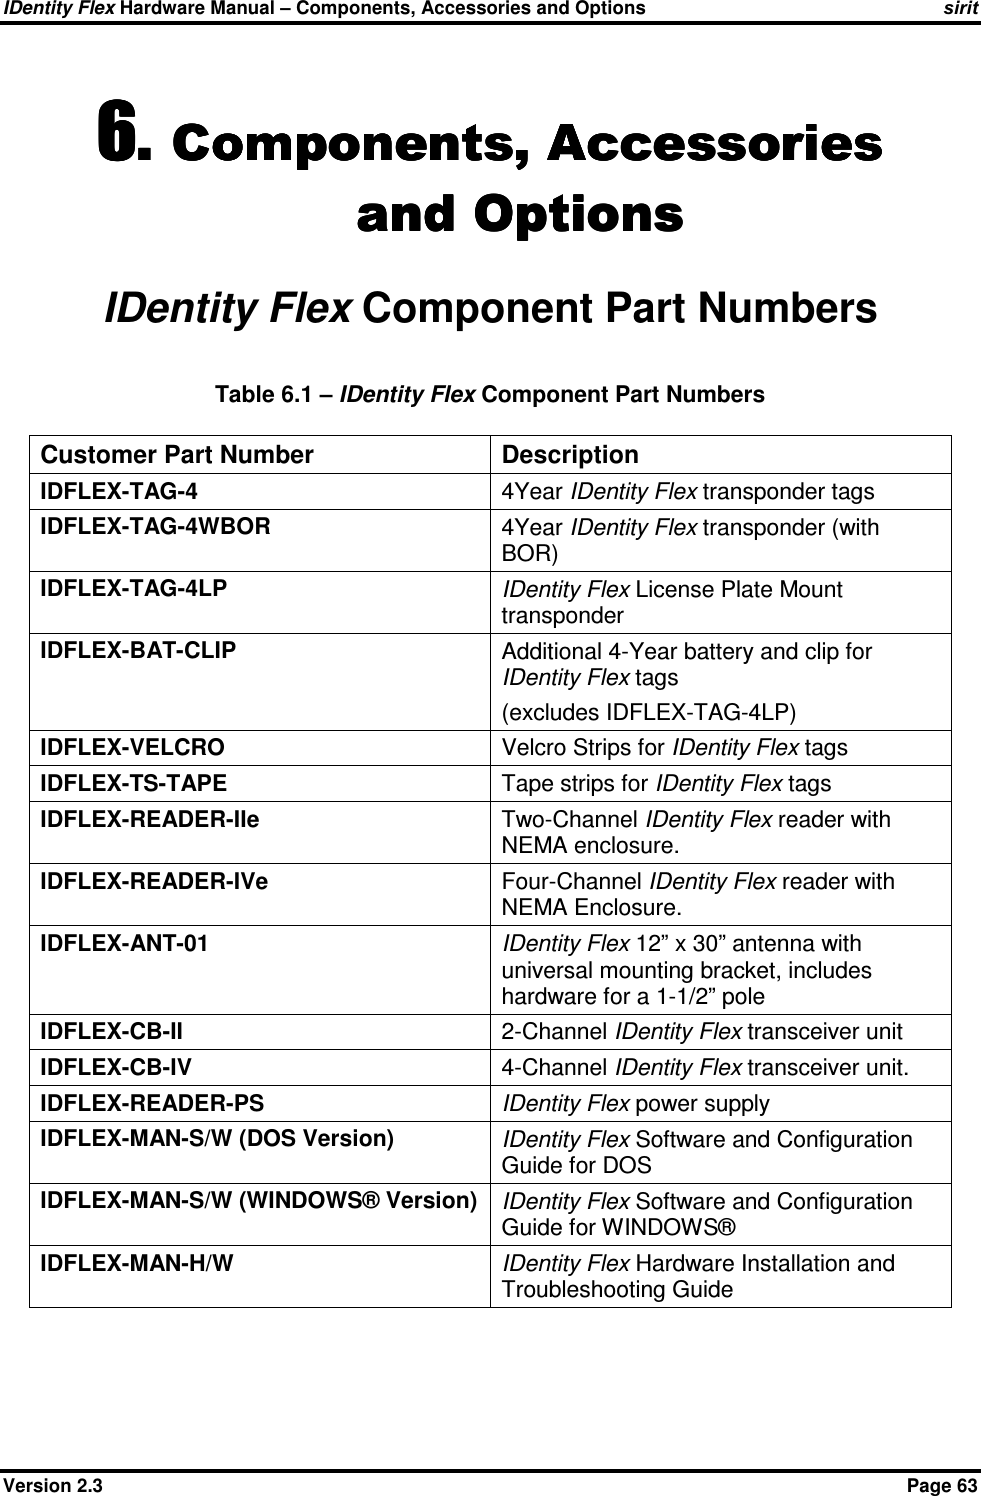 IDentity Flex Hardware Manual – Components, Accessories and Options sirit Version 2.3    Page 63 6.6.6.6. ComponentsComponentsComponentsComponents, Accessories, Accessories, Accessories, Accessories    and Optionsand Optionsand Optionsand Options    IDentity Flex Component Part Numbers Table 6.1 – IDentity Flex Component Part Numbers  Customer Part Number  Description IDFLEX-TAG-4  4Year IDentity Flex transponder tags IDFLEX-TAG-4WBOR  4Year IDentity Flex transponder (with BOR) IDFLEX-TAG-4LP  IDentity Flex License Plate Mount transponder IDFLEX-BAT-CLIP  Additional 4-Year battery and clip for IDentity Flex tags  (excludes IDFLEX-TAG-4LP) IDFLEX-VELCRO  Velcro Strips for IDentity Flex tags IDFLEX-TS-TAPE  Tape strips for IDentity Flex tags IDFLEX-READER-IIe  Two-Channel IDentity Flex reader with NEMA enclosure. IDFLEX-READER-IVe  Four-Channel IDentity Flex reader with NEMA Enclosure. IDFLEX-ANT-01  IDentity Flex 12” x 30” antenna with universal mounting bracket, includes hardware for a 1-1/2” pole IDFLEX-CB-II  2-Channel IDentity Flex transceiver unit IDFLEX-CB-IV  4-Channel IDentity Flex transceiver unit. IDFLEX-READER-PS  IDentity Flex power supply IDFLEX-MAN-S/W (DOS Version)  IDentity Flex Software and Configuration Guide for DOS IDFLEX-MAN-S/W (WINDOWS® Version) IDentity Flex Software and Configuration Guide for WINDOWS® IDFLEX-MAN-H/W  IDentity Flex Hardware Installation and Troubleshooting Guide 